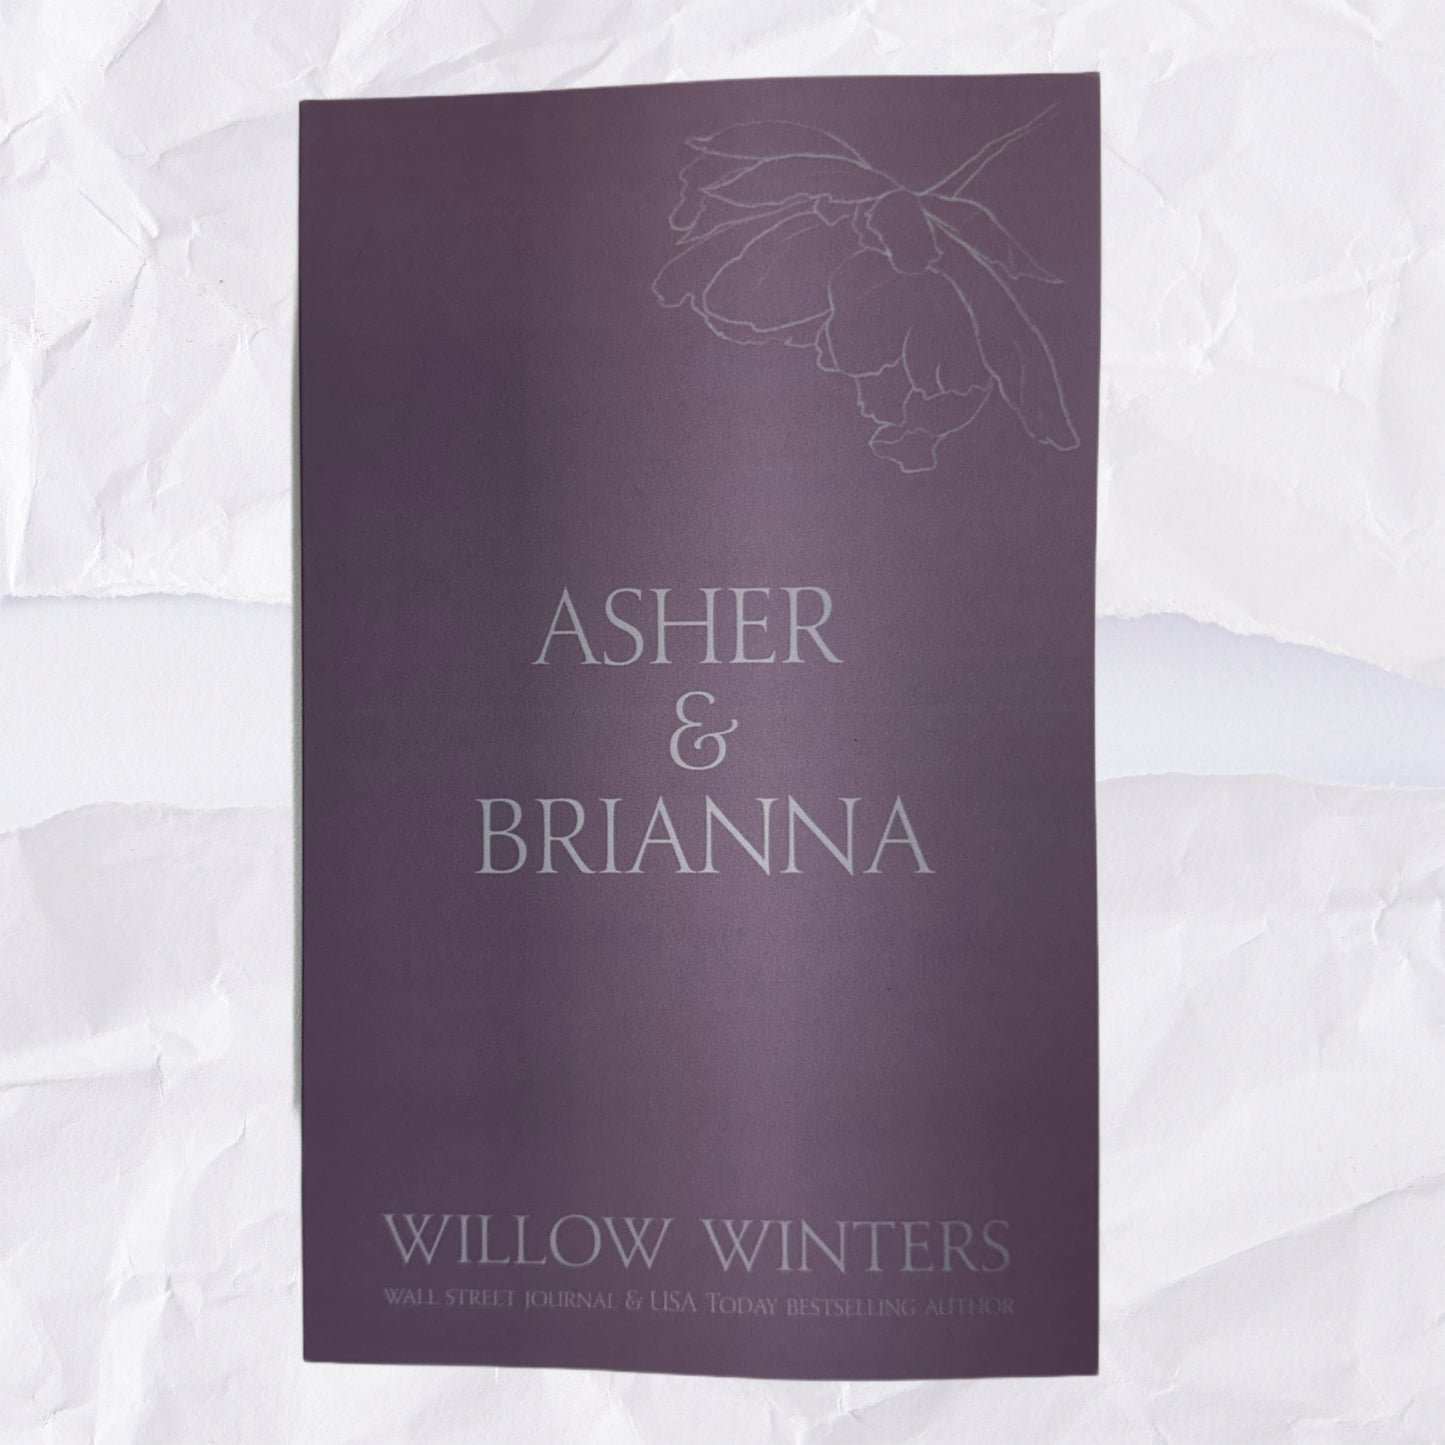 52) Asher & Brianna: Discreet Series by Willow Winters